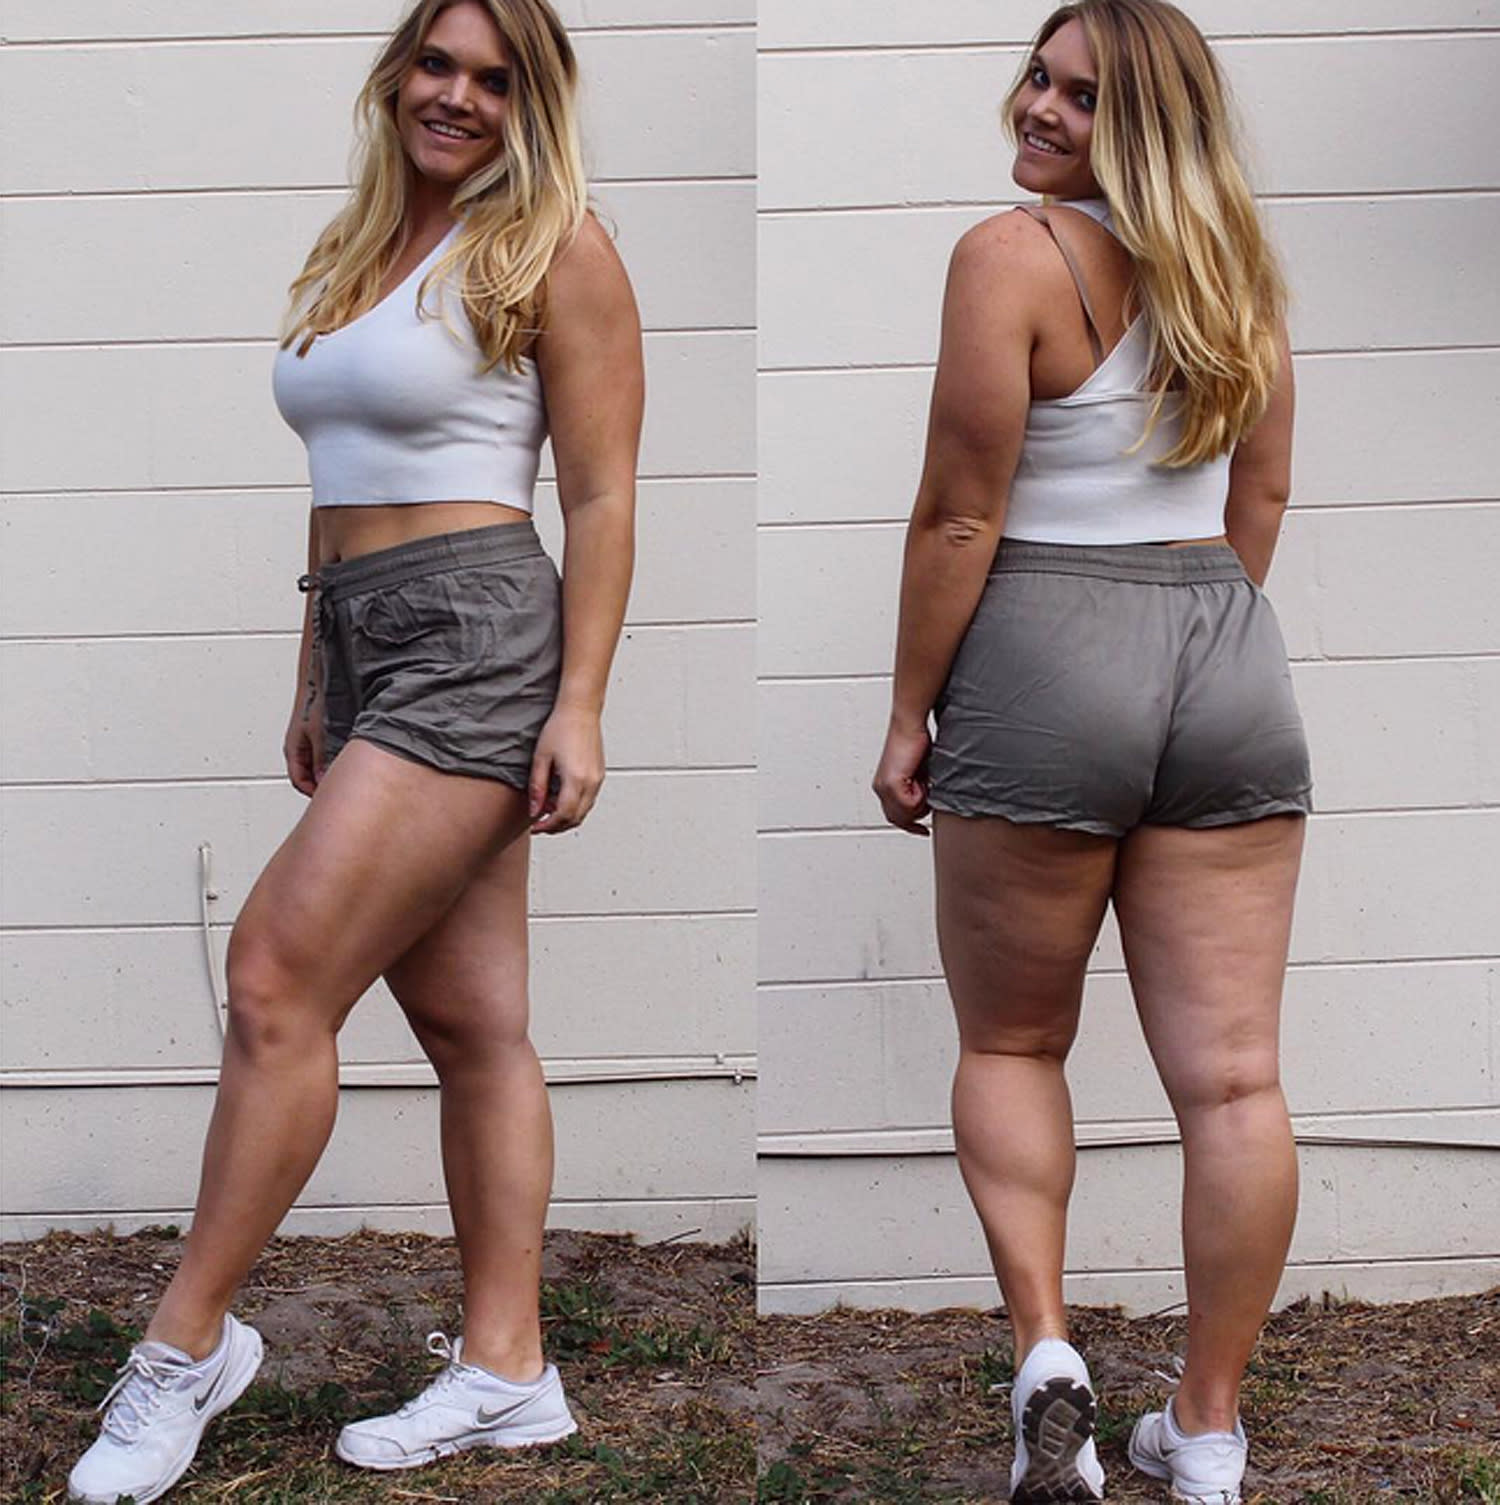 Body Positivity Advocate Proudly Displays Her Cellulite ‘you Are So